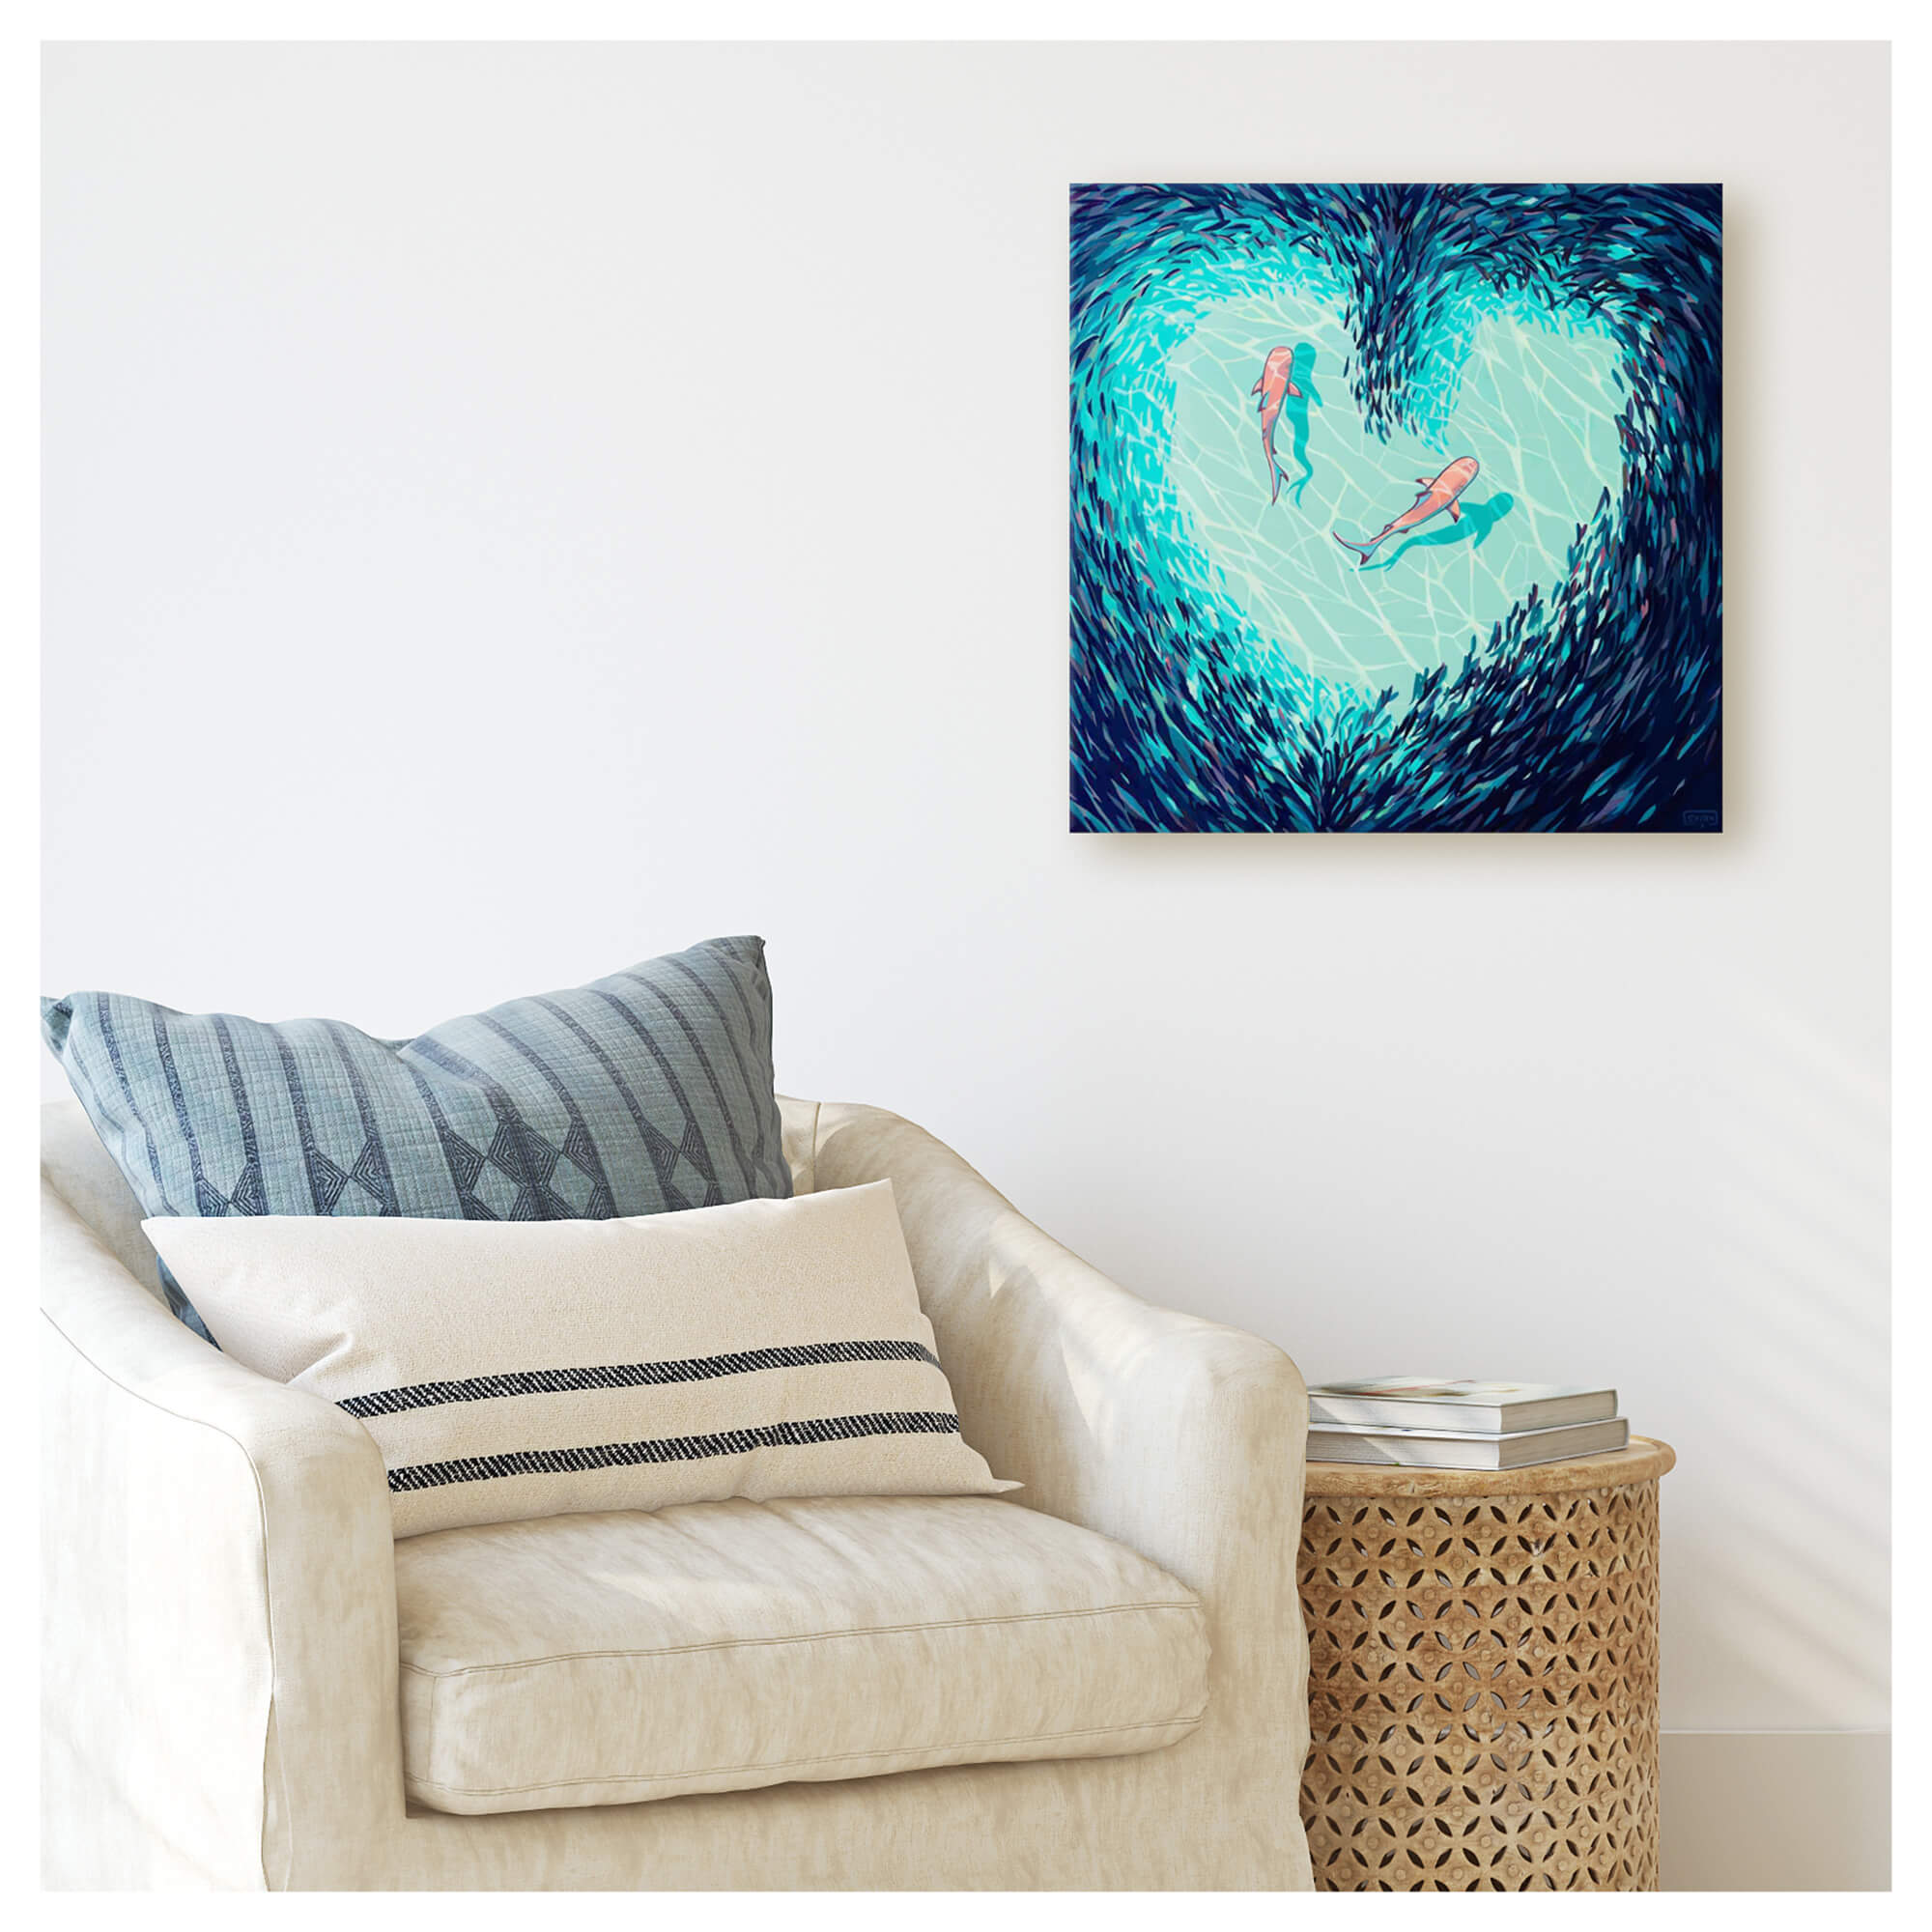 A canvas giclée of a school of fish in a heart-shaped formation exposing the aqua and blue hues of the ocean floor beneath them by Hawaii artist Christie Shinn